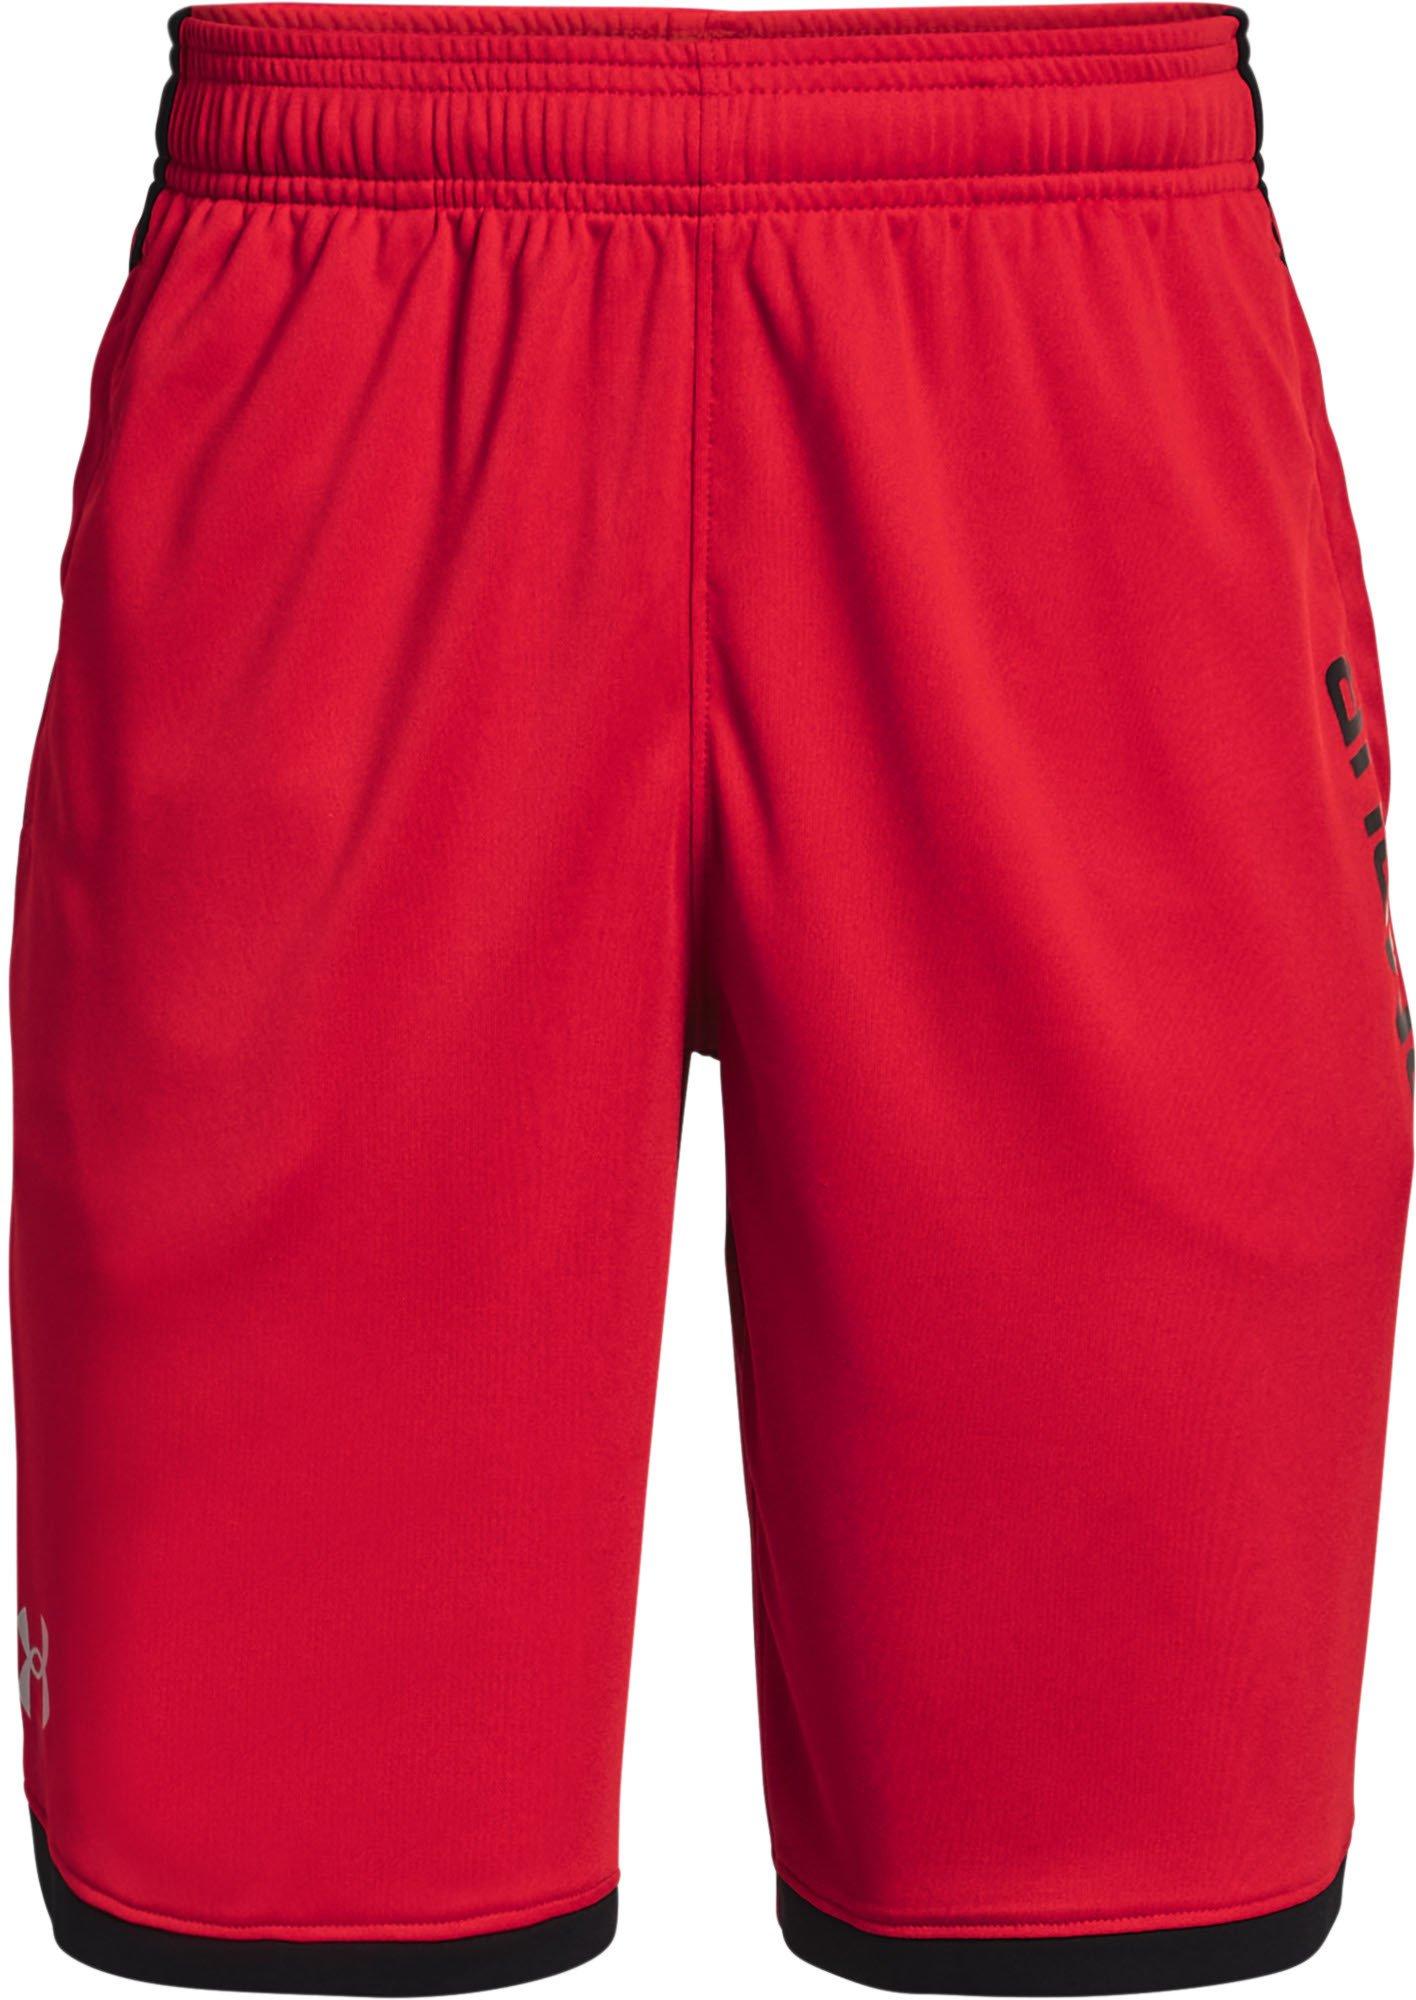 Under Armour Stunt 3.0 Shorts-RED S